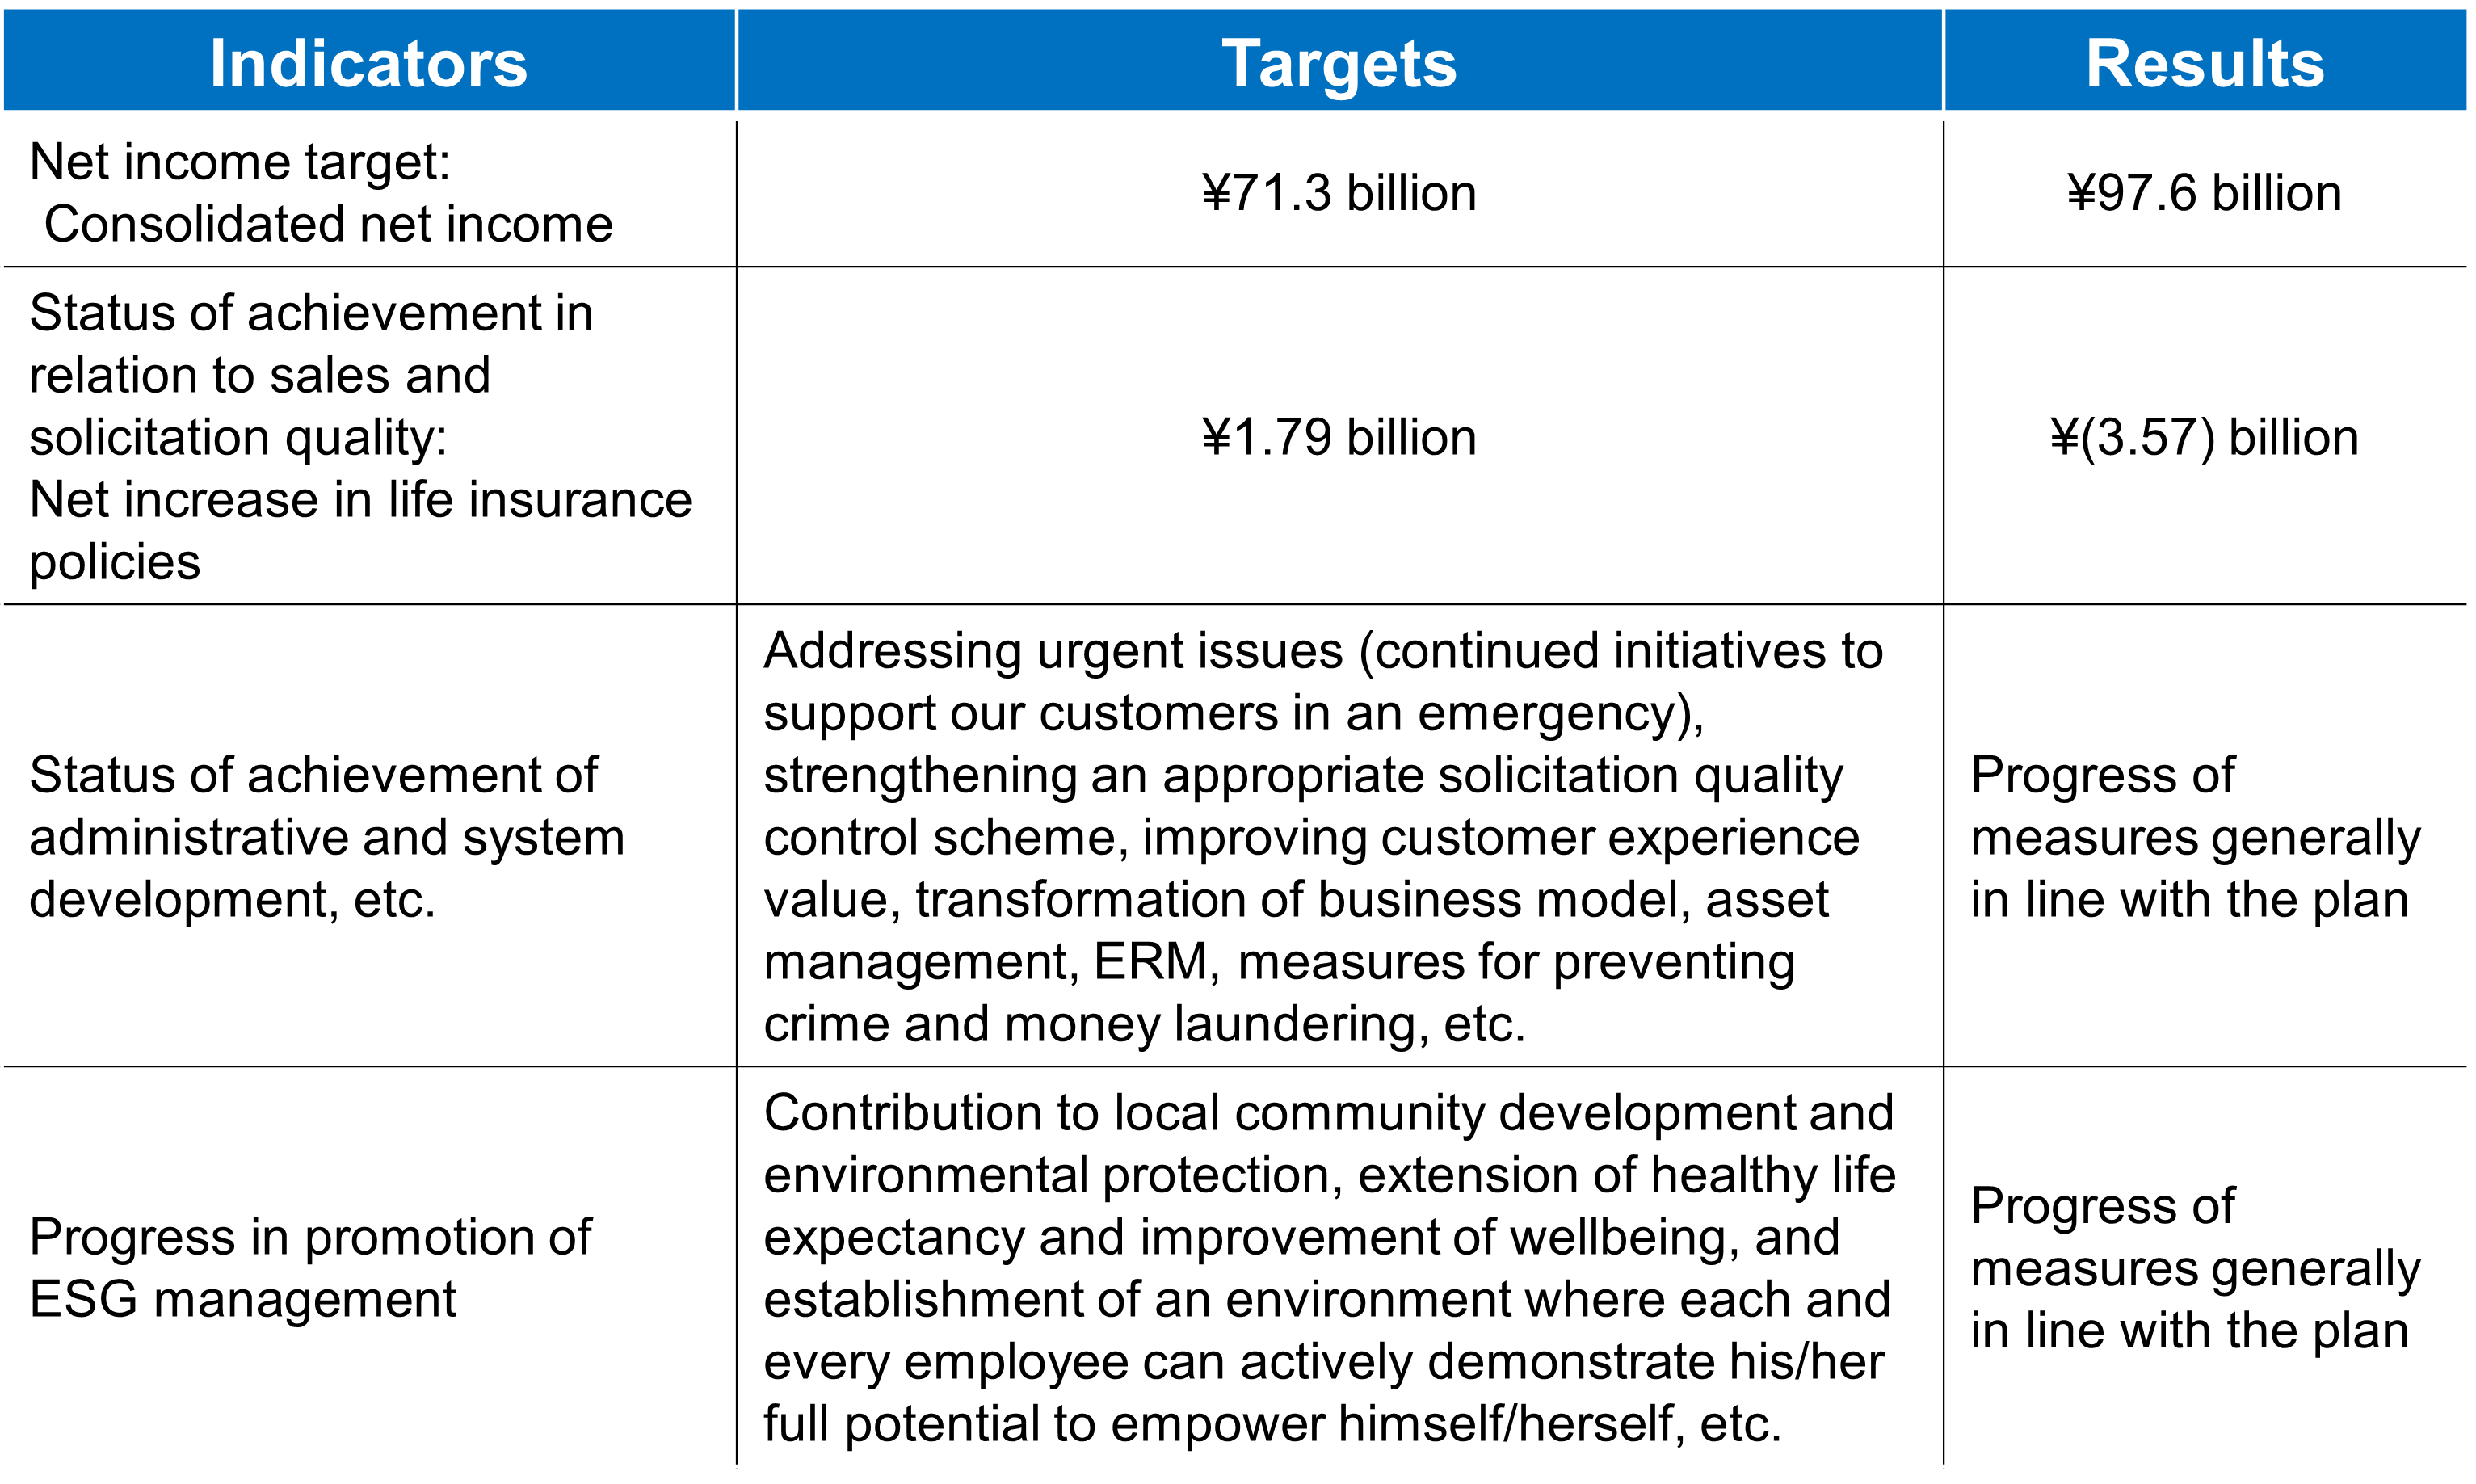 Targets and Results of Indicators Related to the Relevant Performance-linked Compensation in FY2022